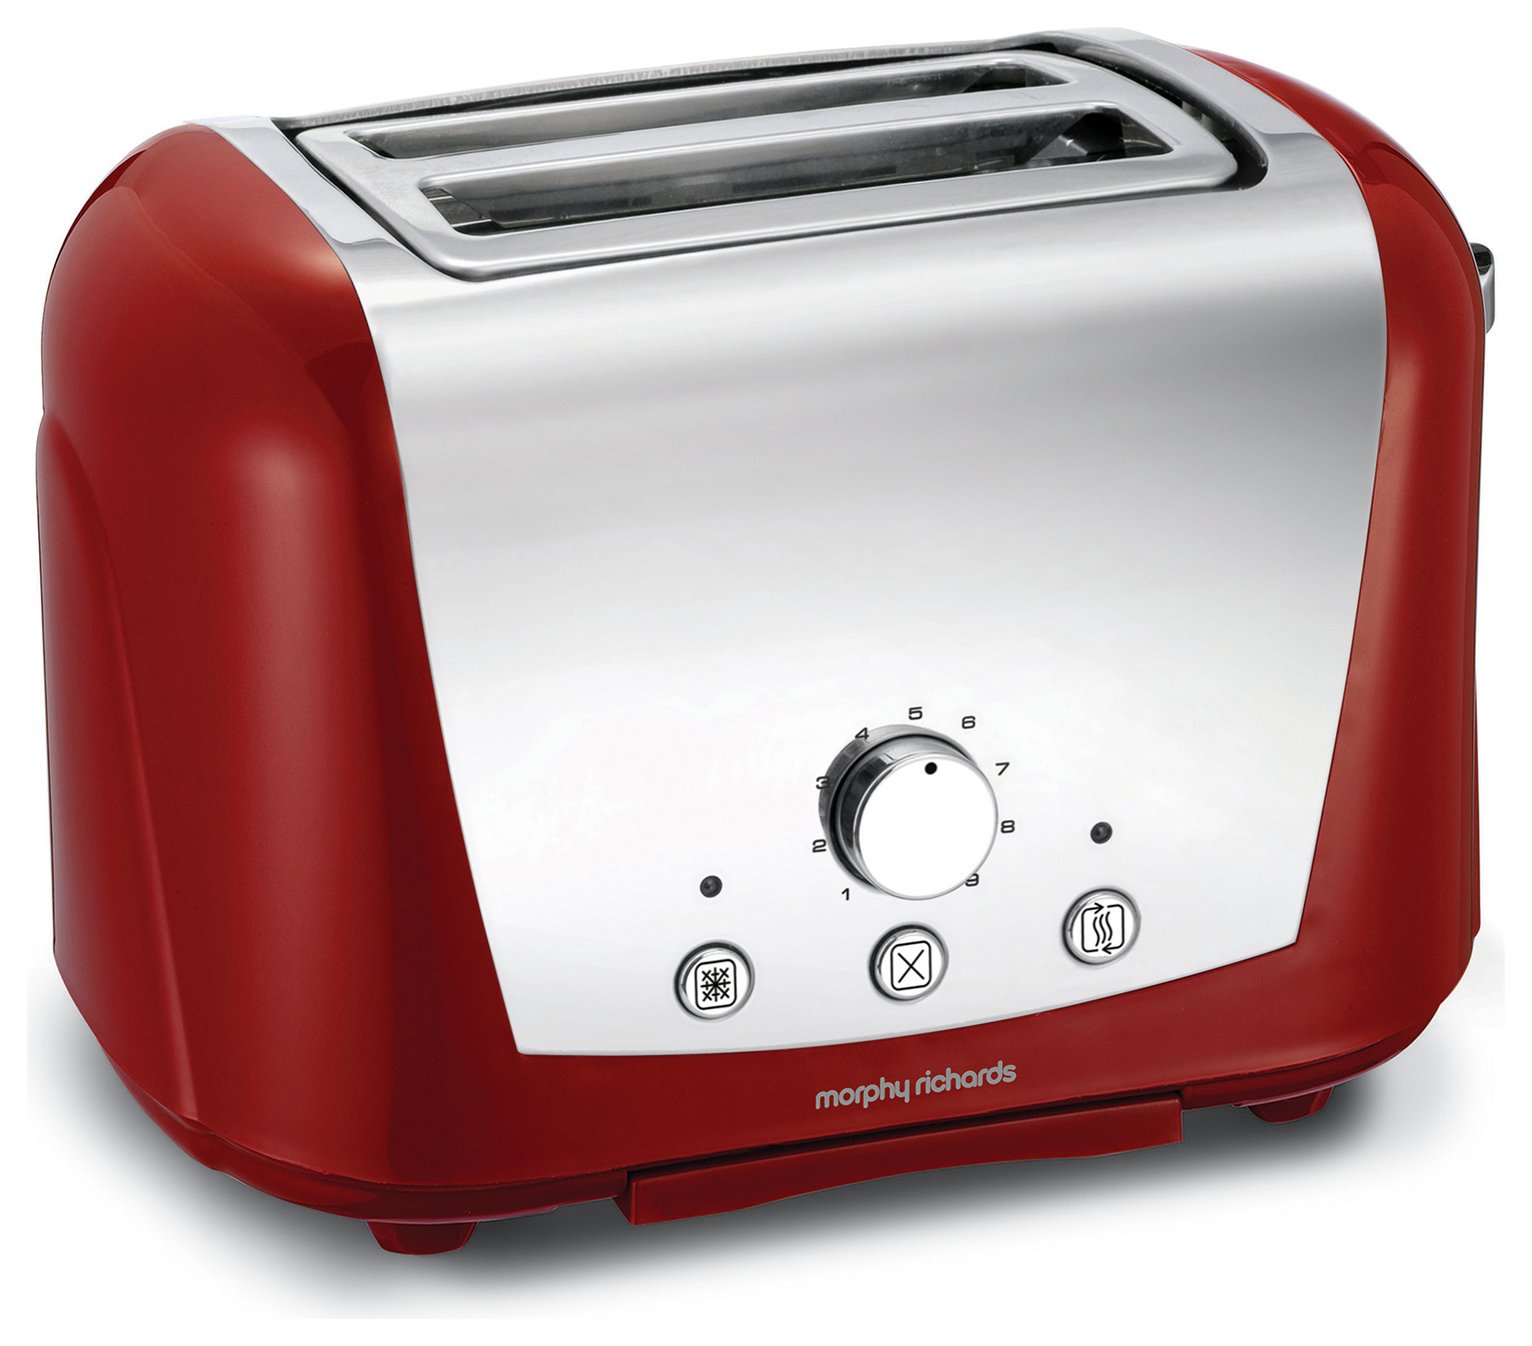 Morphy Richards 222254 Accents 2 Slice Dome Toaster - Red